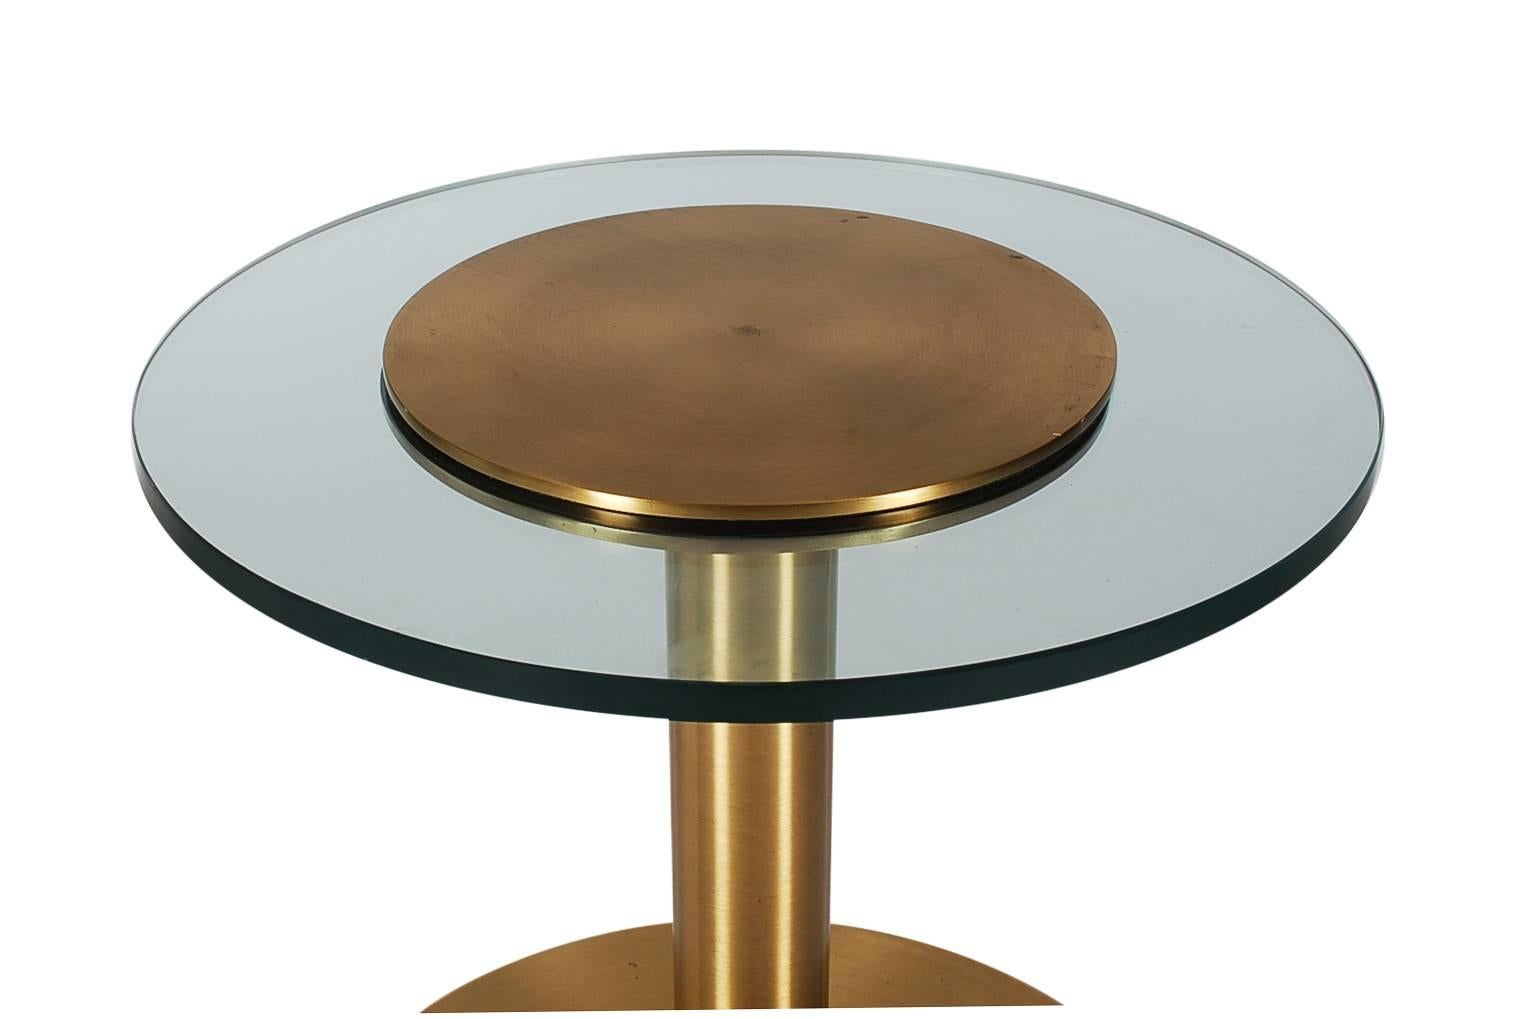 Canadian Mid-Century Modern Brass and Glass Side Table after Karl Springer